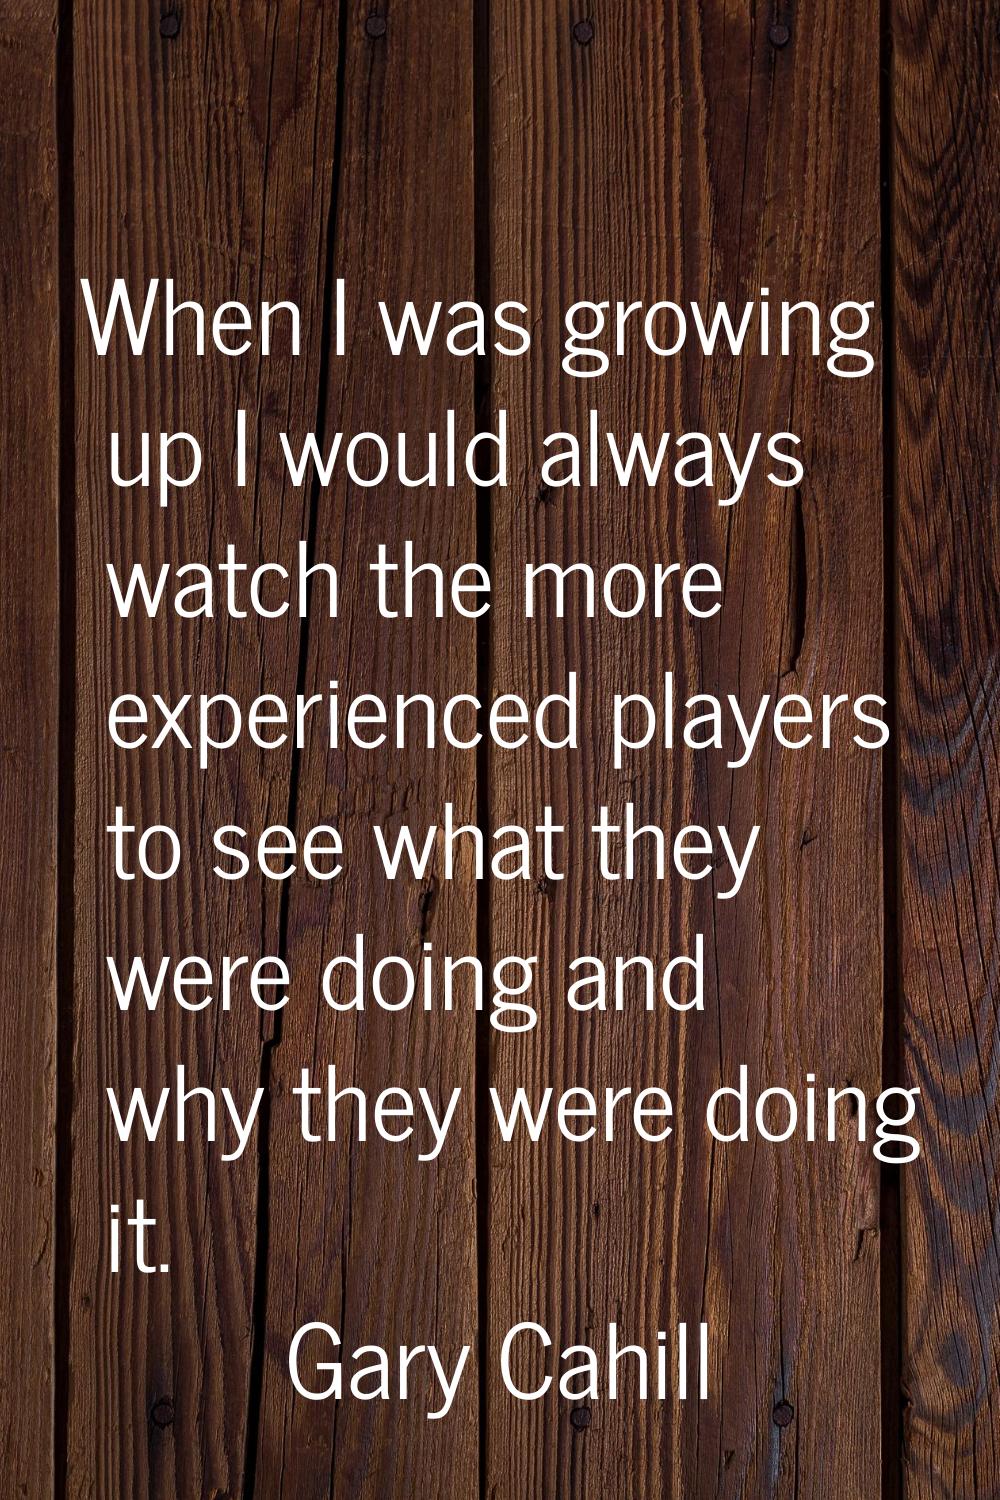 When I was growing up I would always watch the more experienced players to see what they were doing